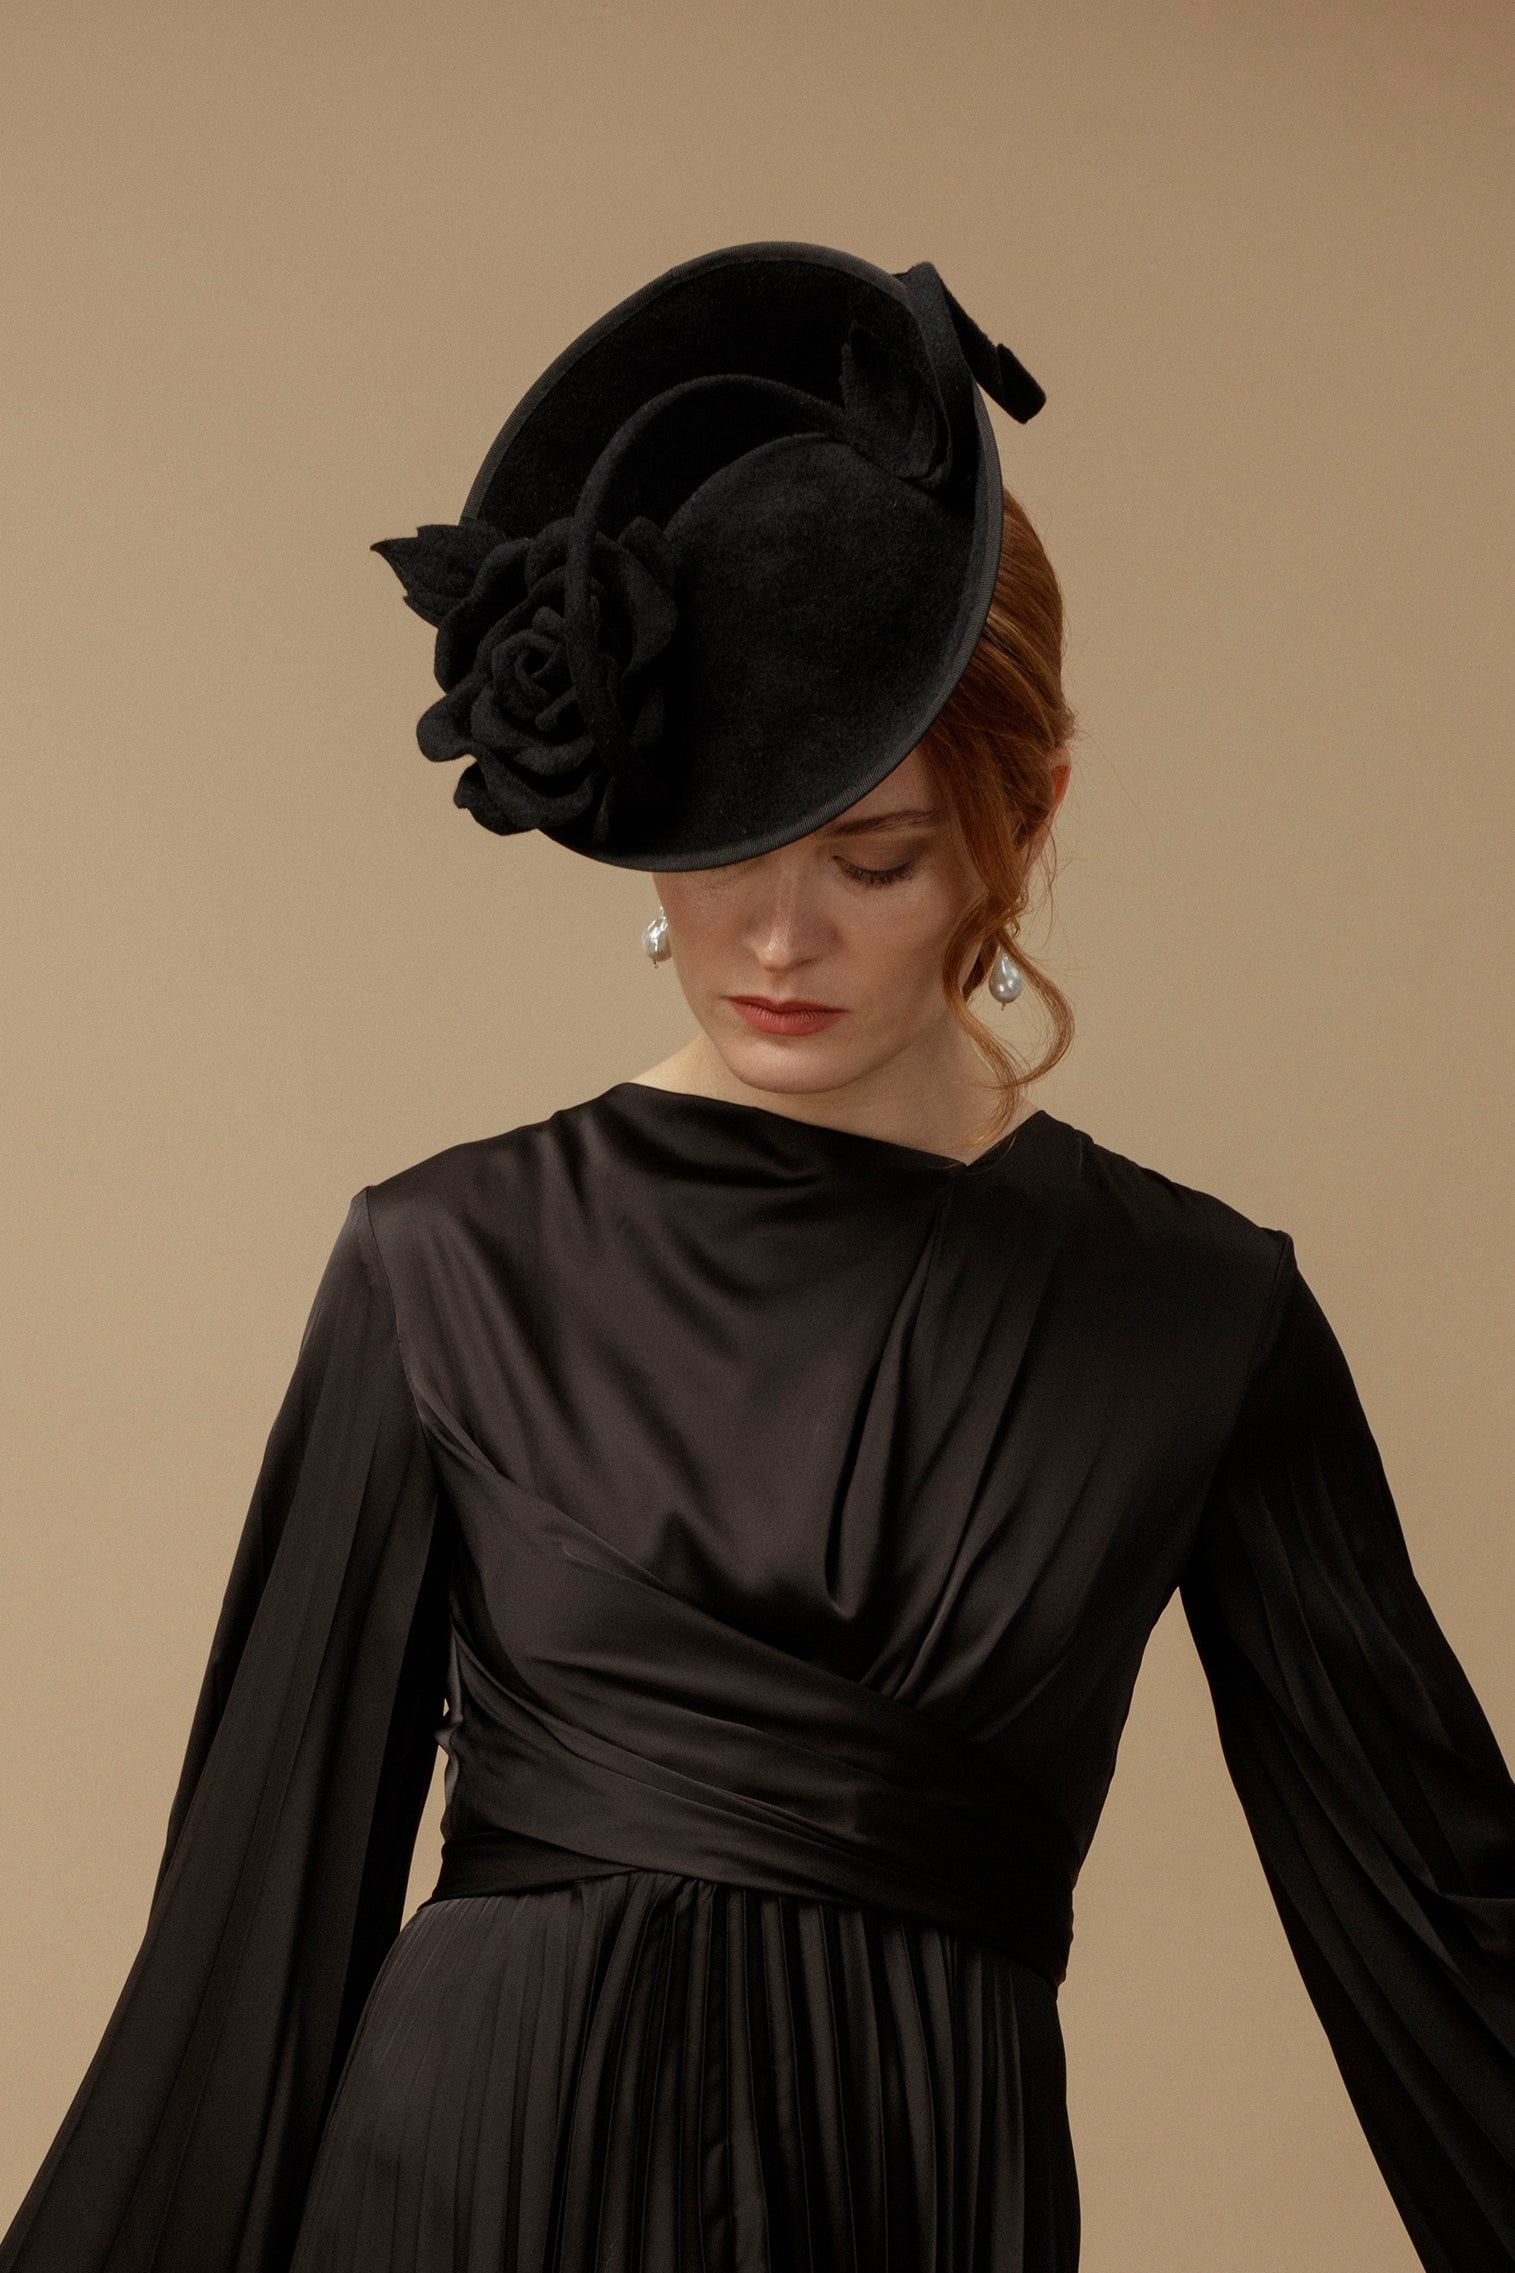 Black Belgravia Rose Hat - Lock Couture by Awon Golding - Lock & Co. Hatters London UK